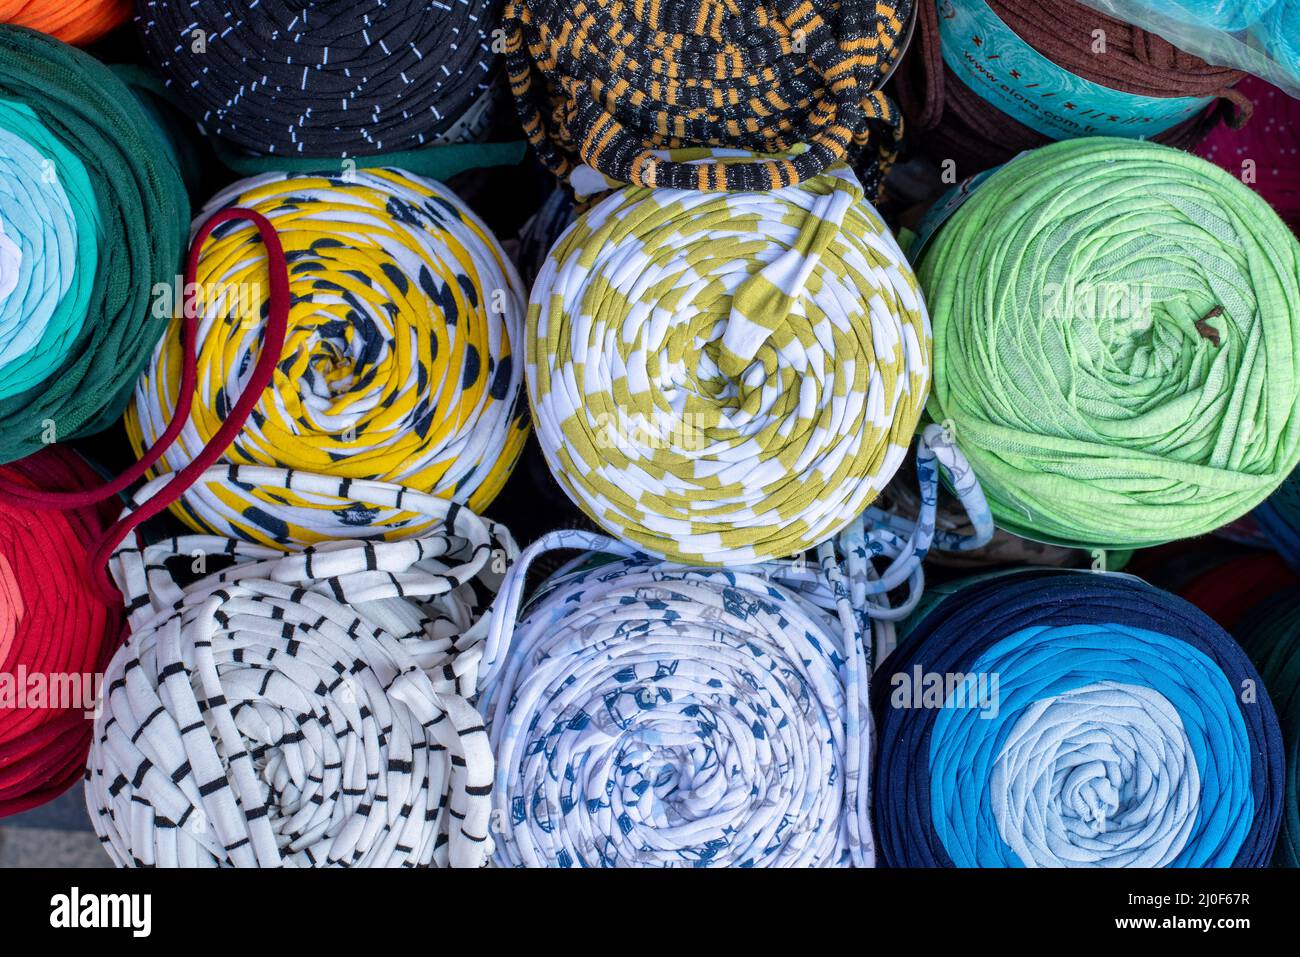 Rolled Stylish comfort and colourful blankets stored on top of each other. Stock Photo